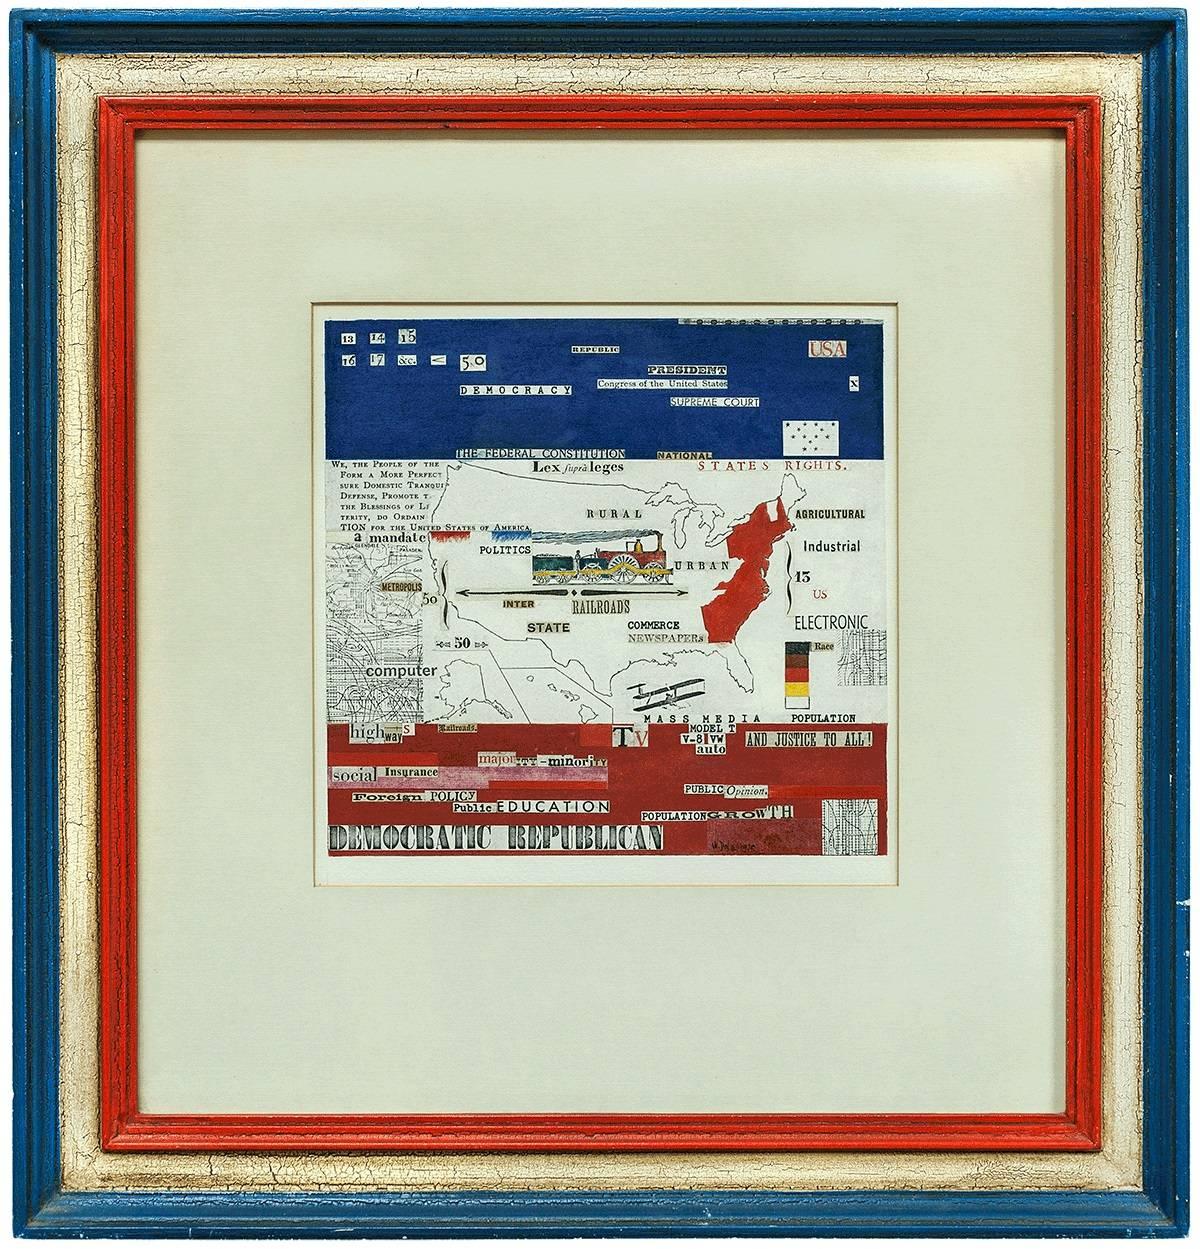 UNTITLED "USA" (DEMOCRATIC REPUBLICAN COLLAGE) - Mixed Media Art by William Dole